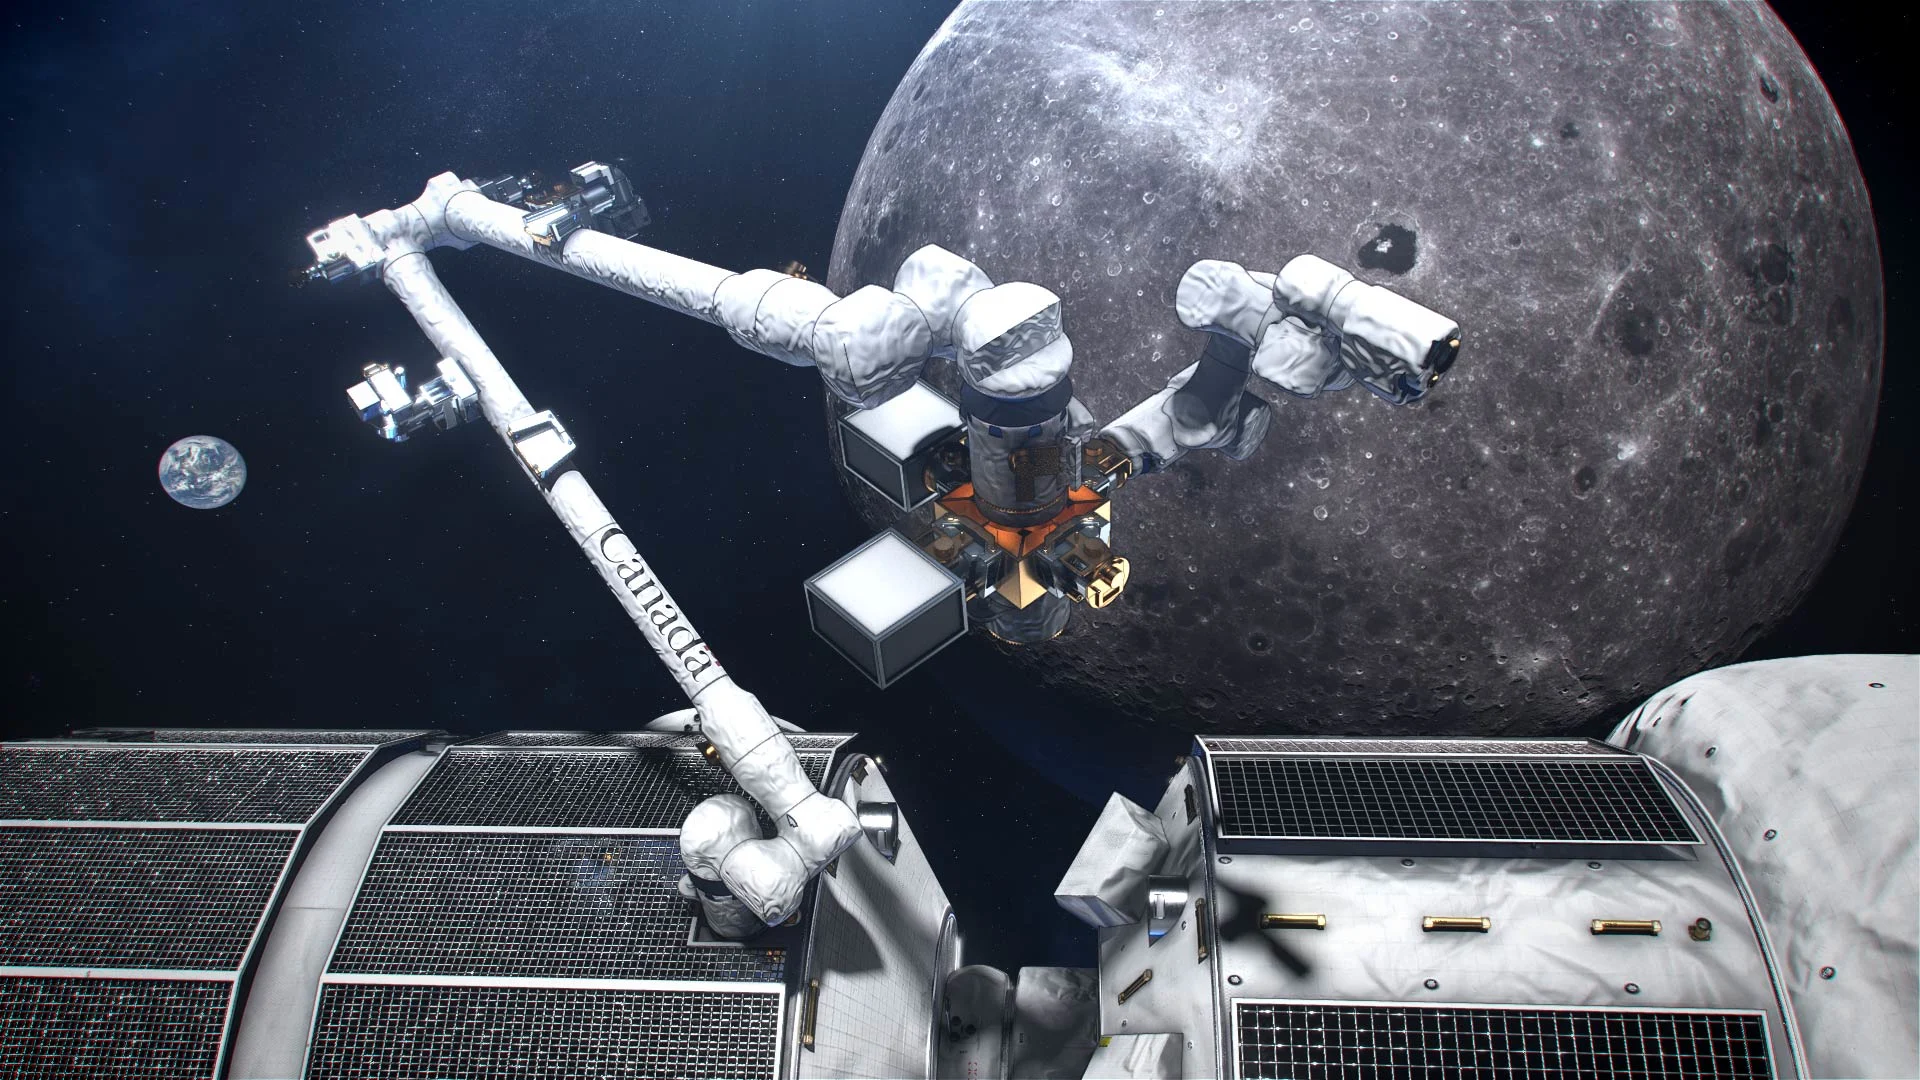 Canada’s space technology and innovations are crucial to the Artemis missions